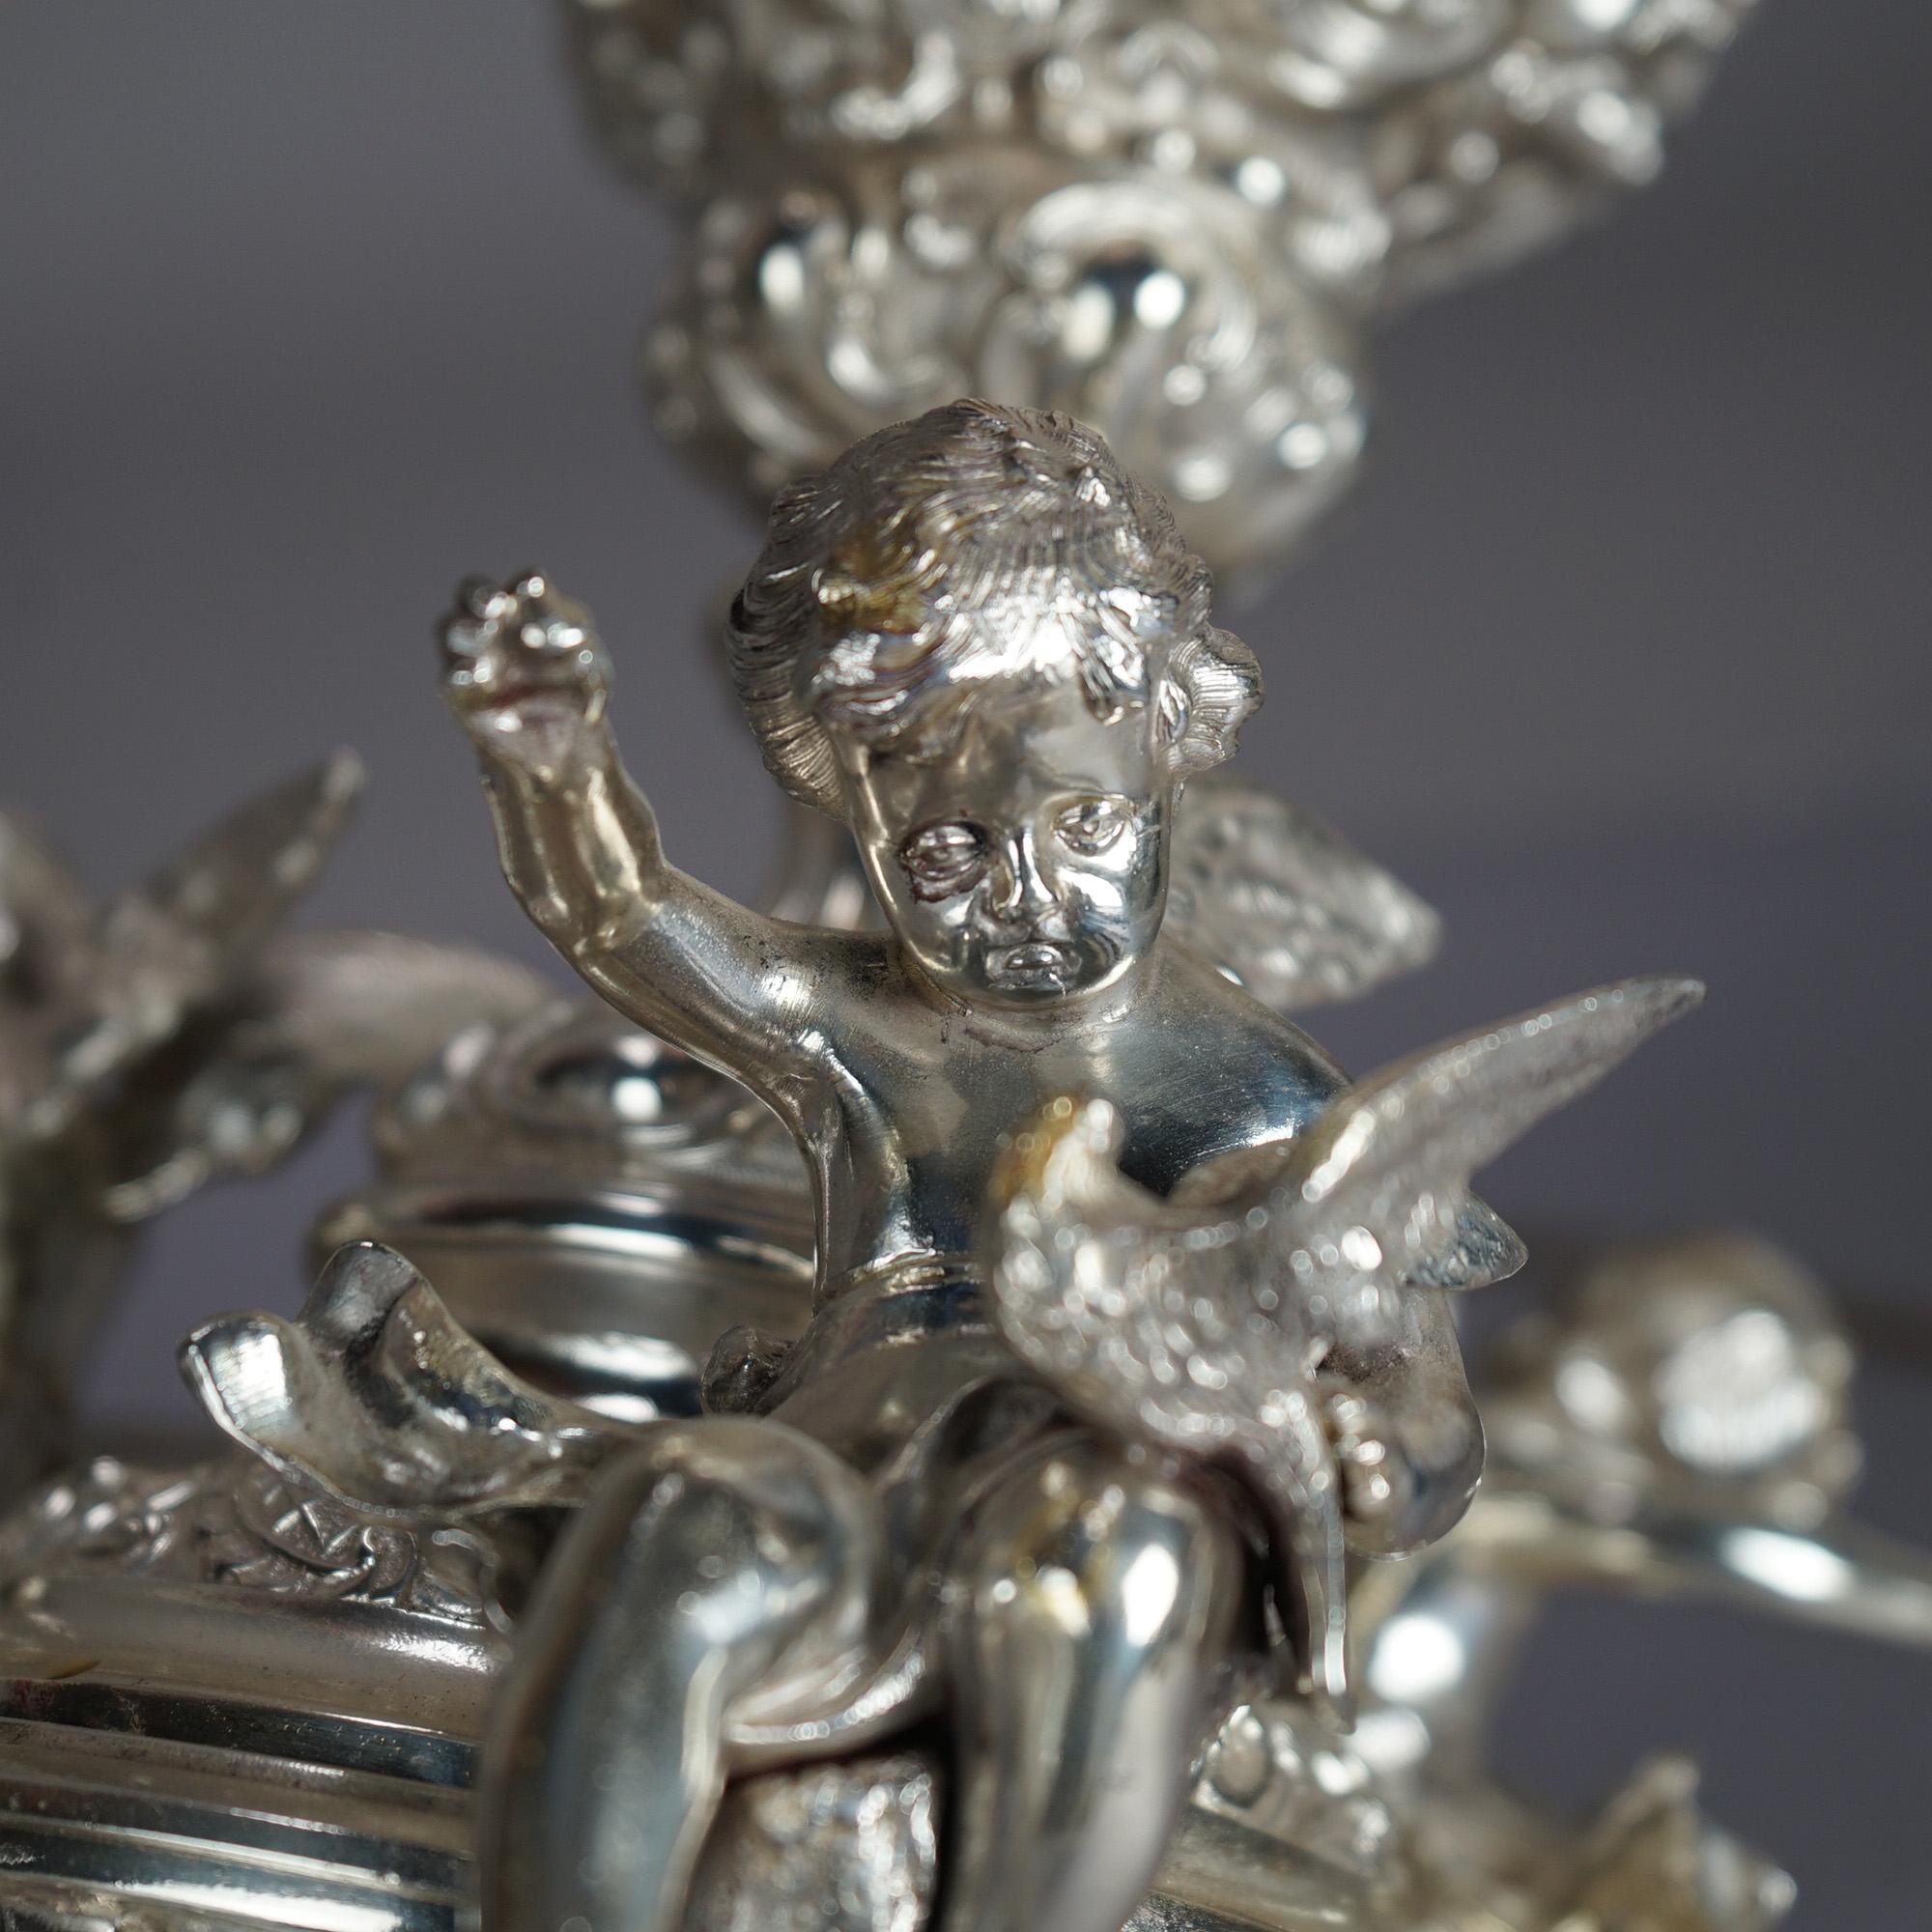 19th Century Antique Rococo Figural Silver Plate Parlor Lamp With Winged Cherubs c1890 For Sale